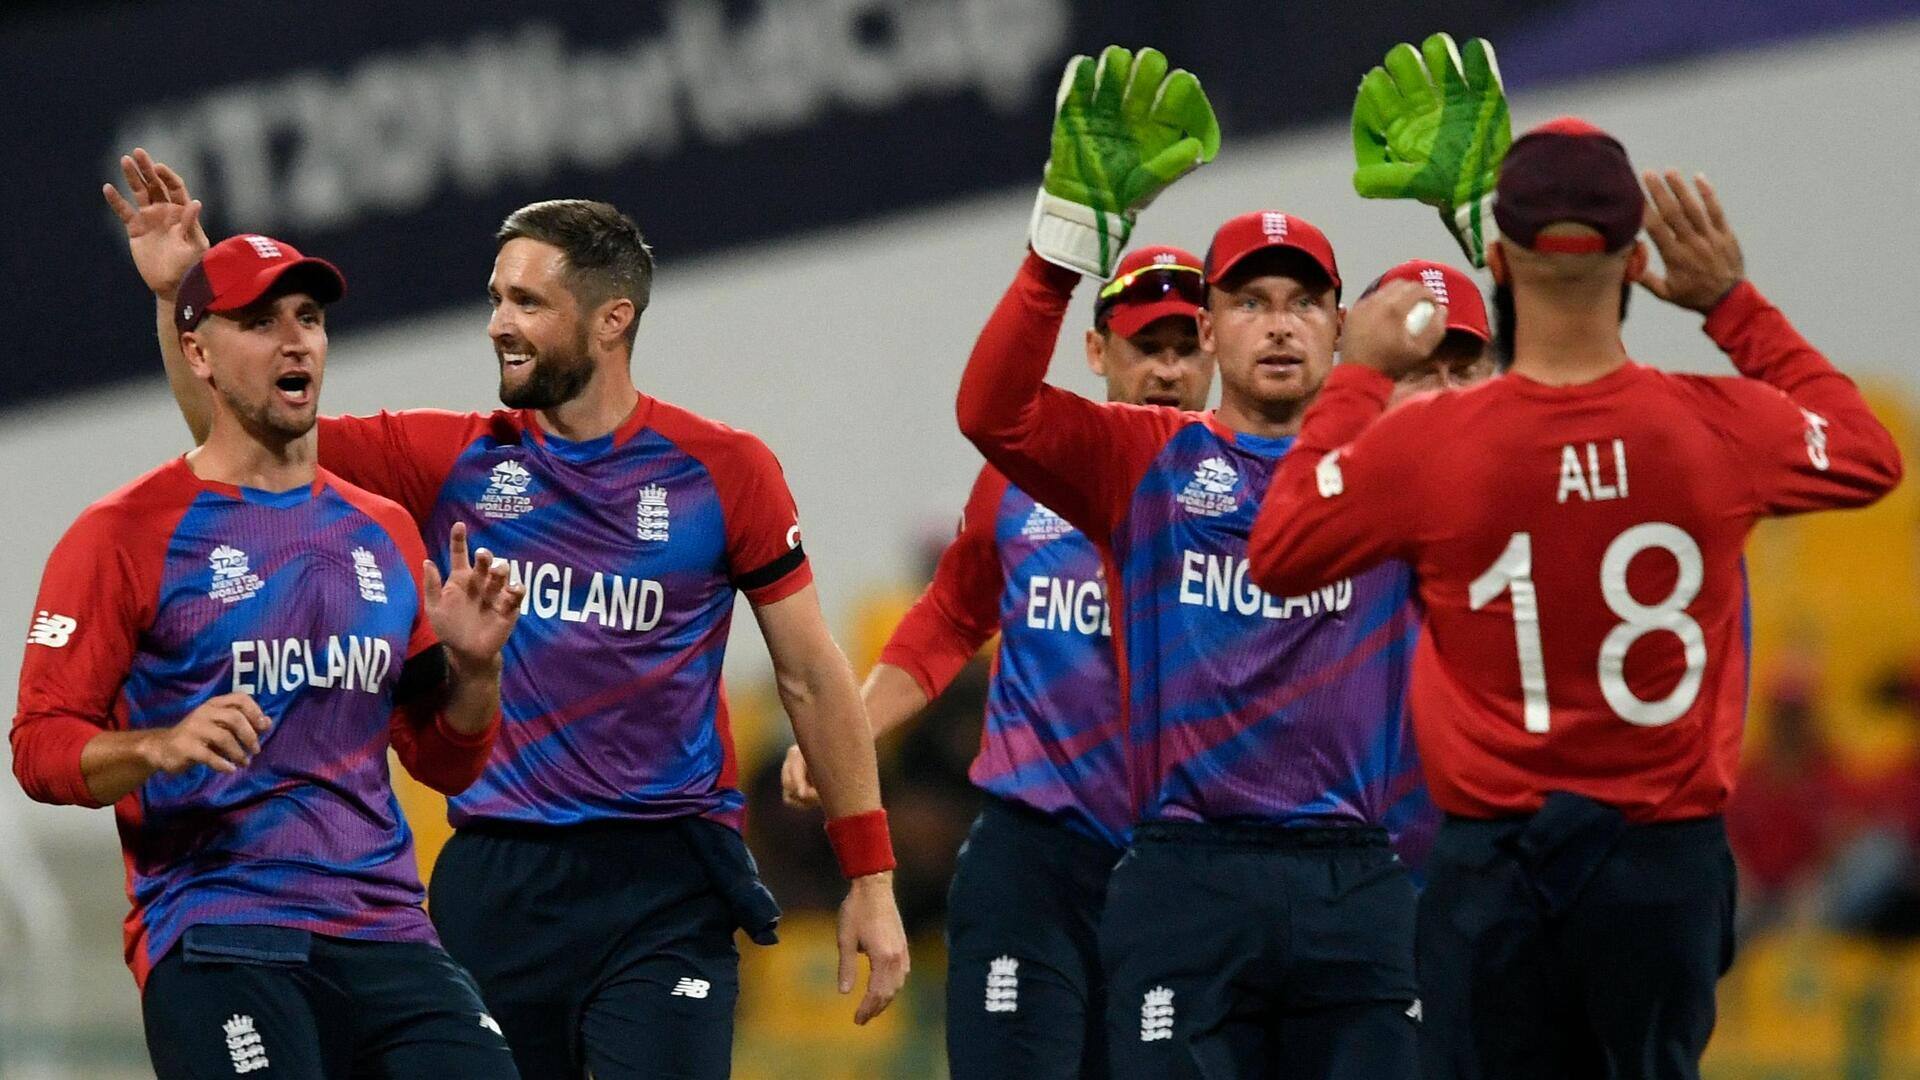 West Indies vs England T20I series: Presenting the Statistical preview